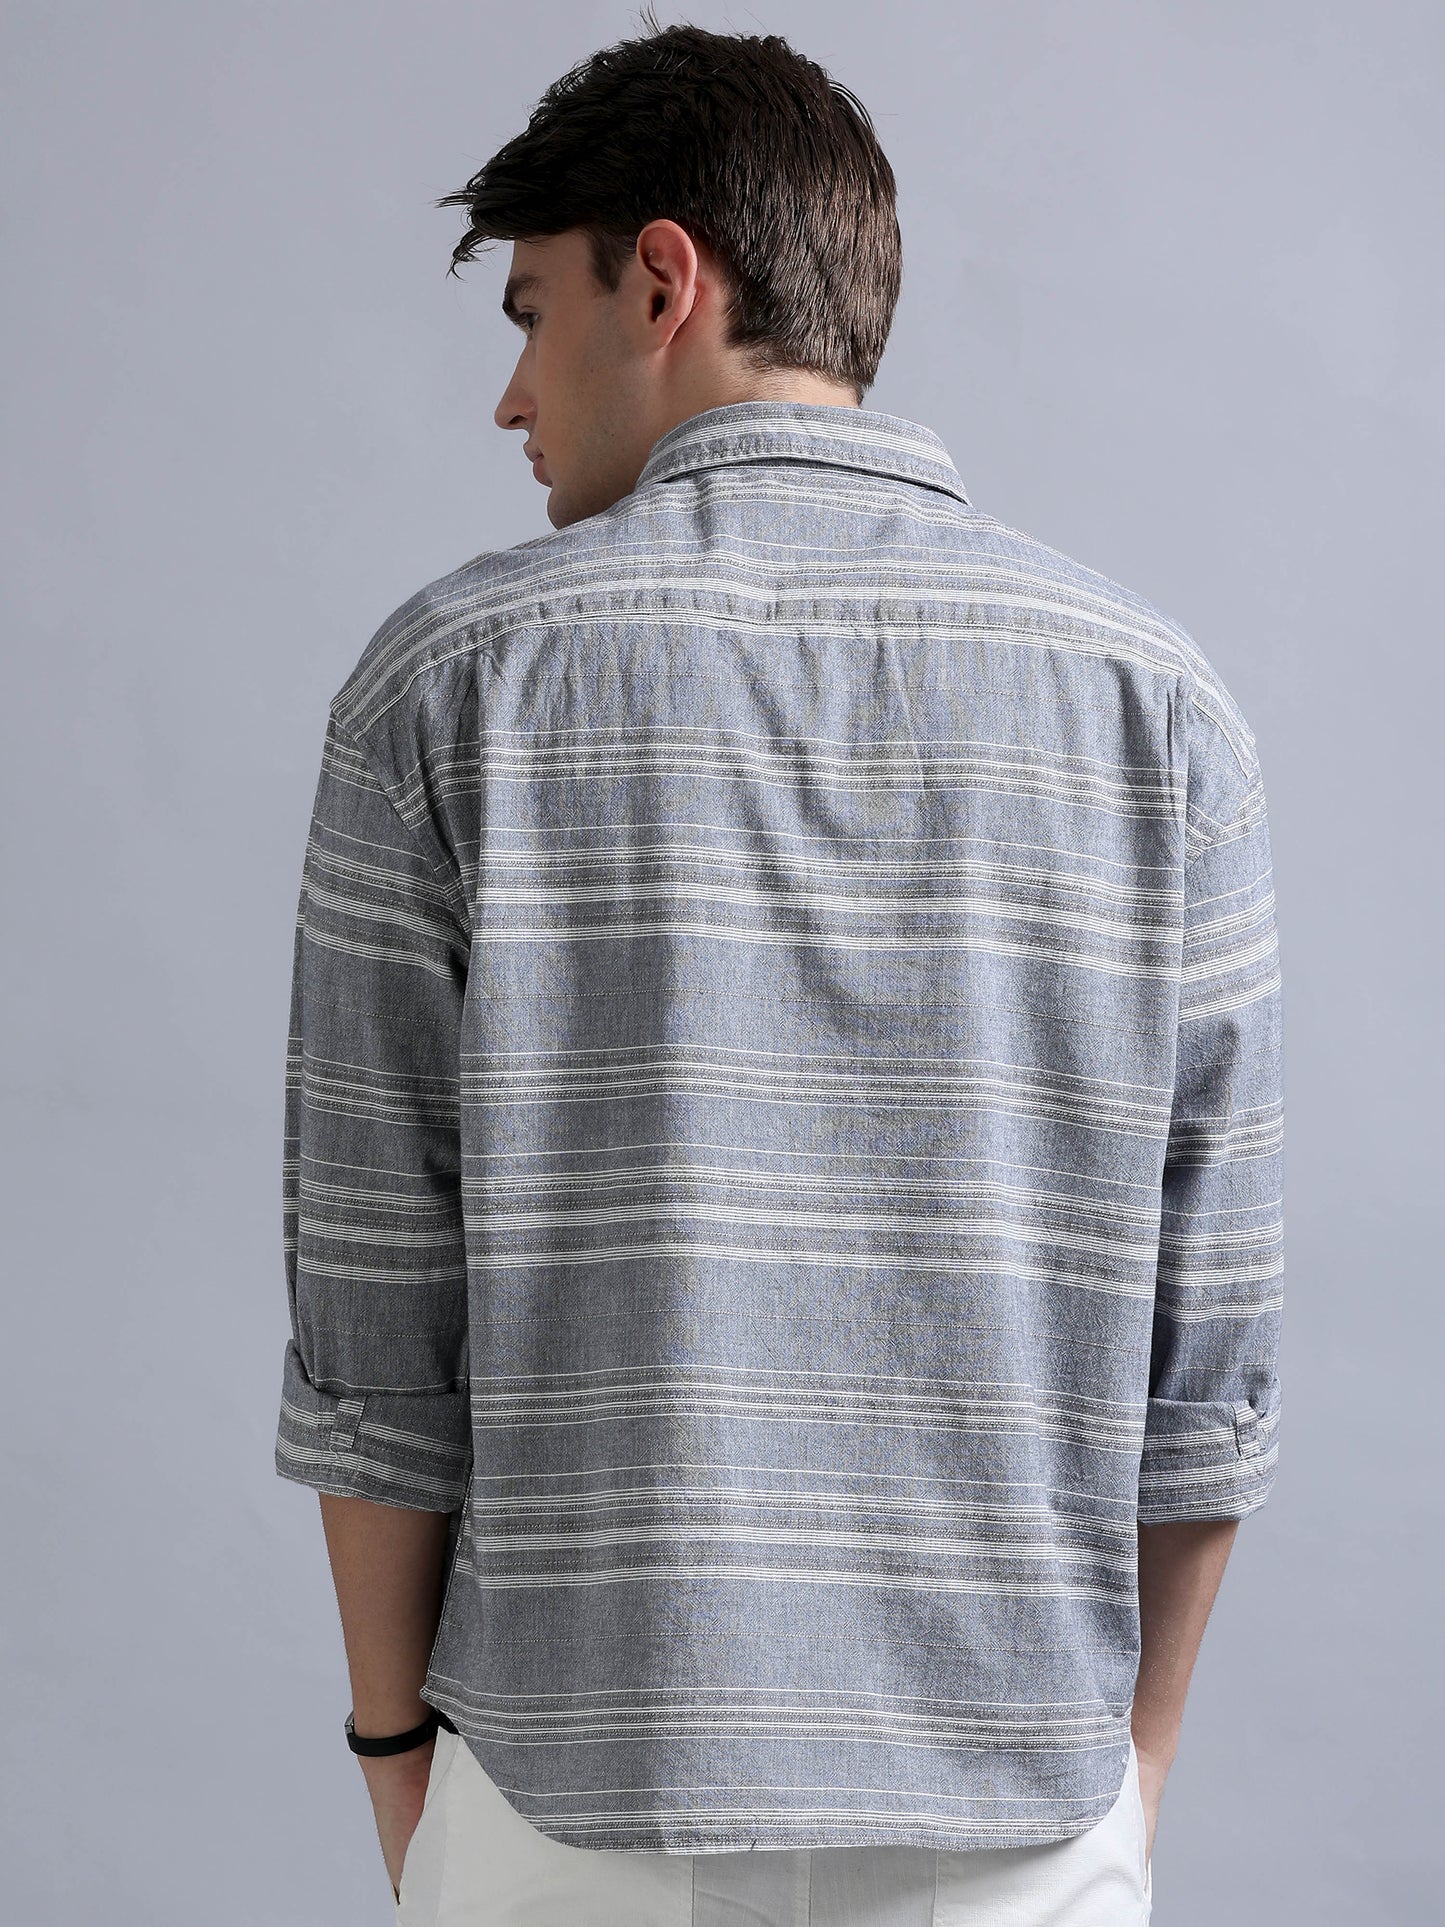 Premium Men Shirt, Relaxed Fit, Yarn Dyed Stripes, Pure Cotton, Full Sleeve, Grey